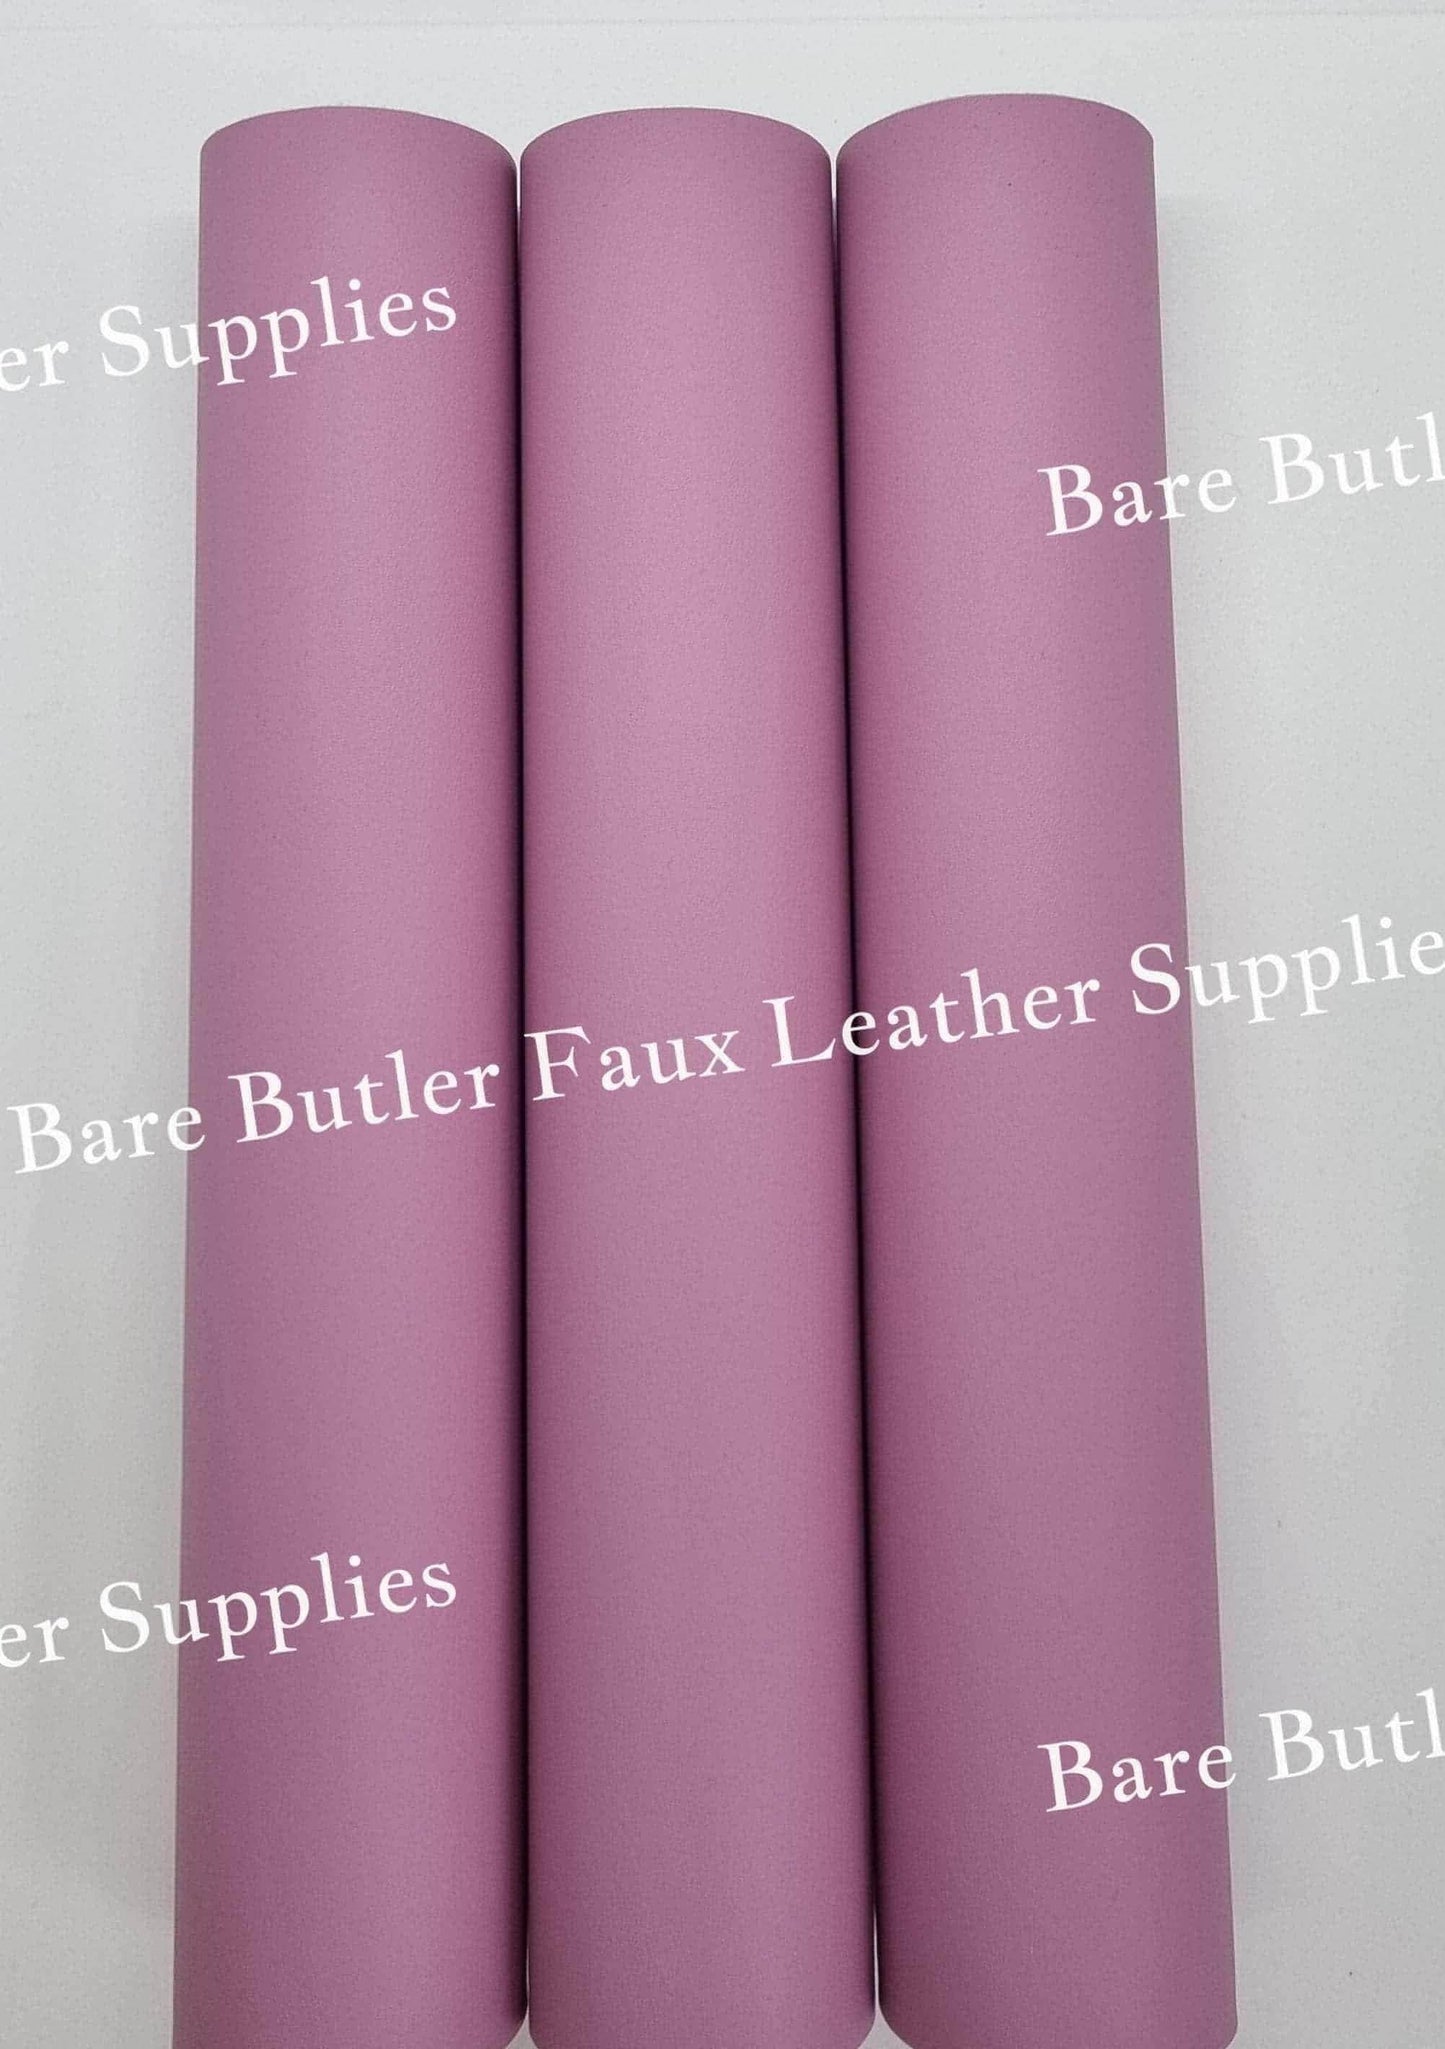 Solid Colour Litchi Roll - Light Purple - Colour, Faux, Faux Leather, Leather, leatherette, Litchi, purple, Solid - Bare Butler Faux Leather Supplies 